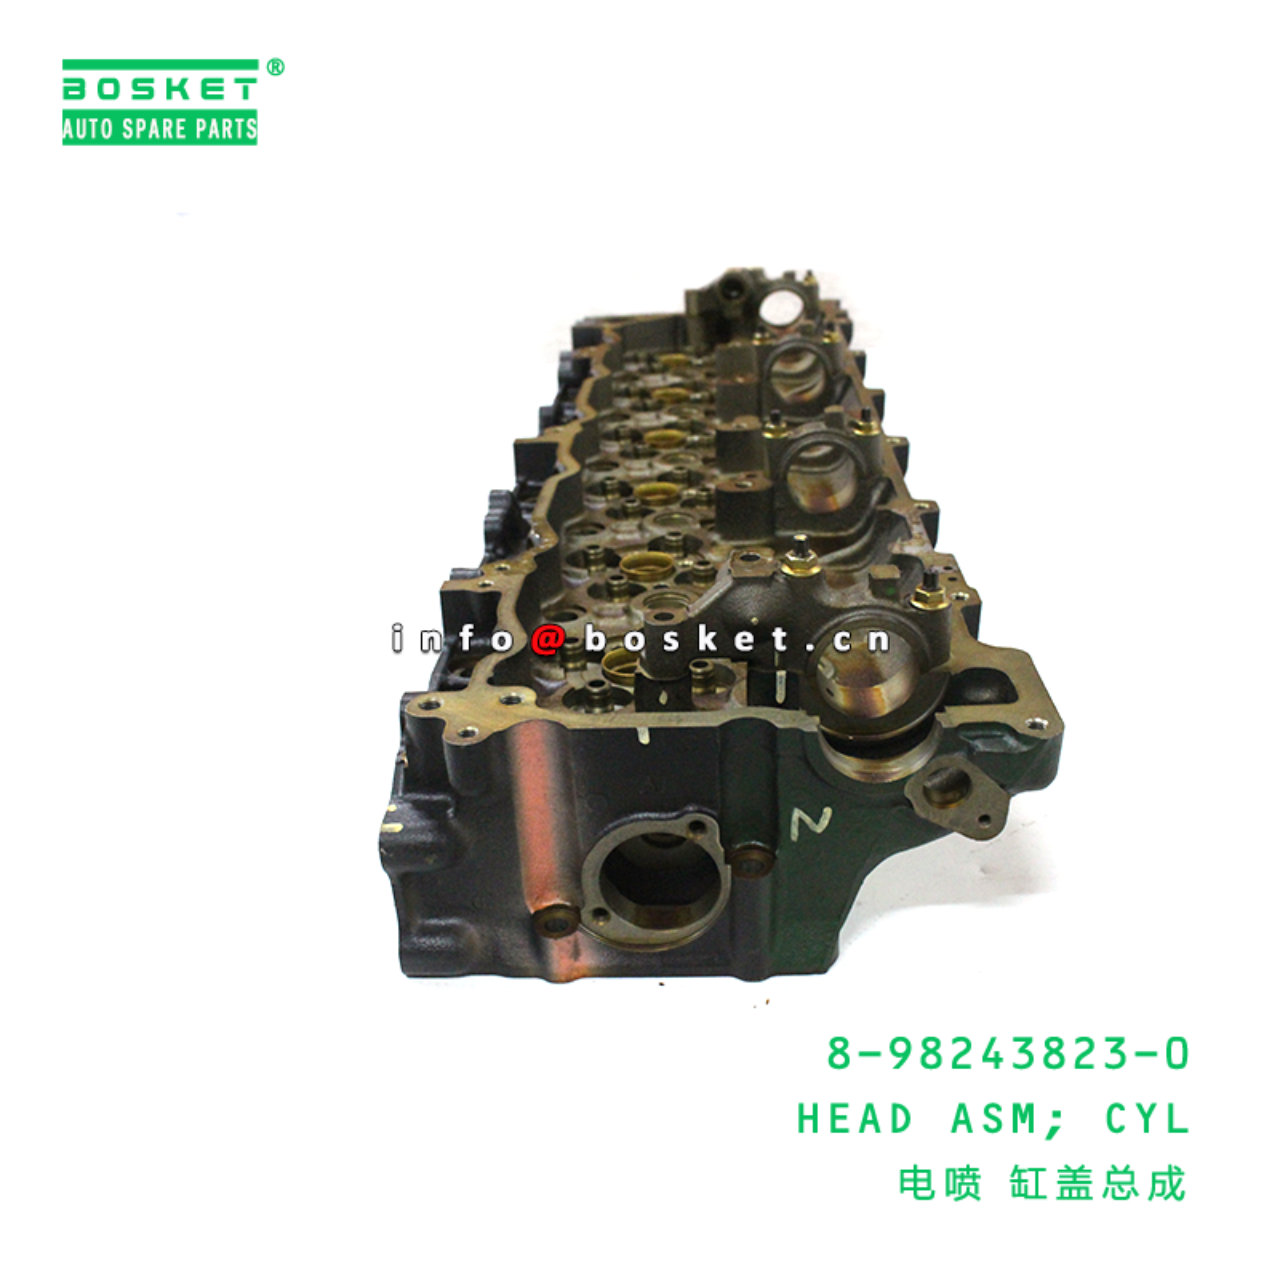 8-98243823-0 Cylinder Head Assembly Suitable for ISUZU 6HK1 8982438230